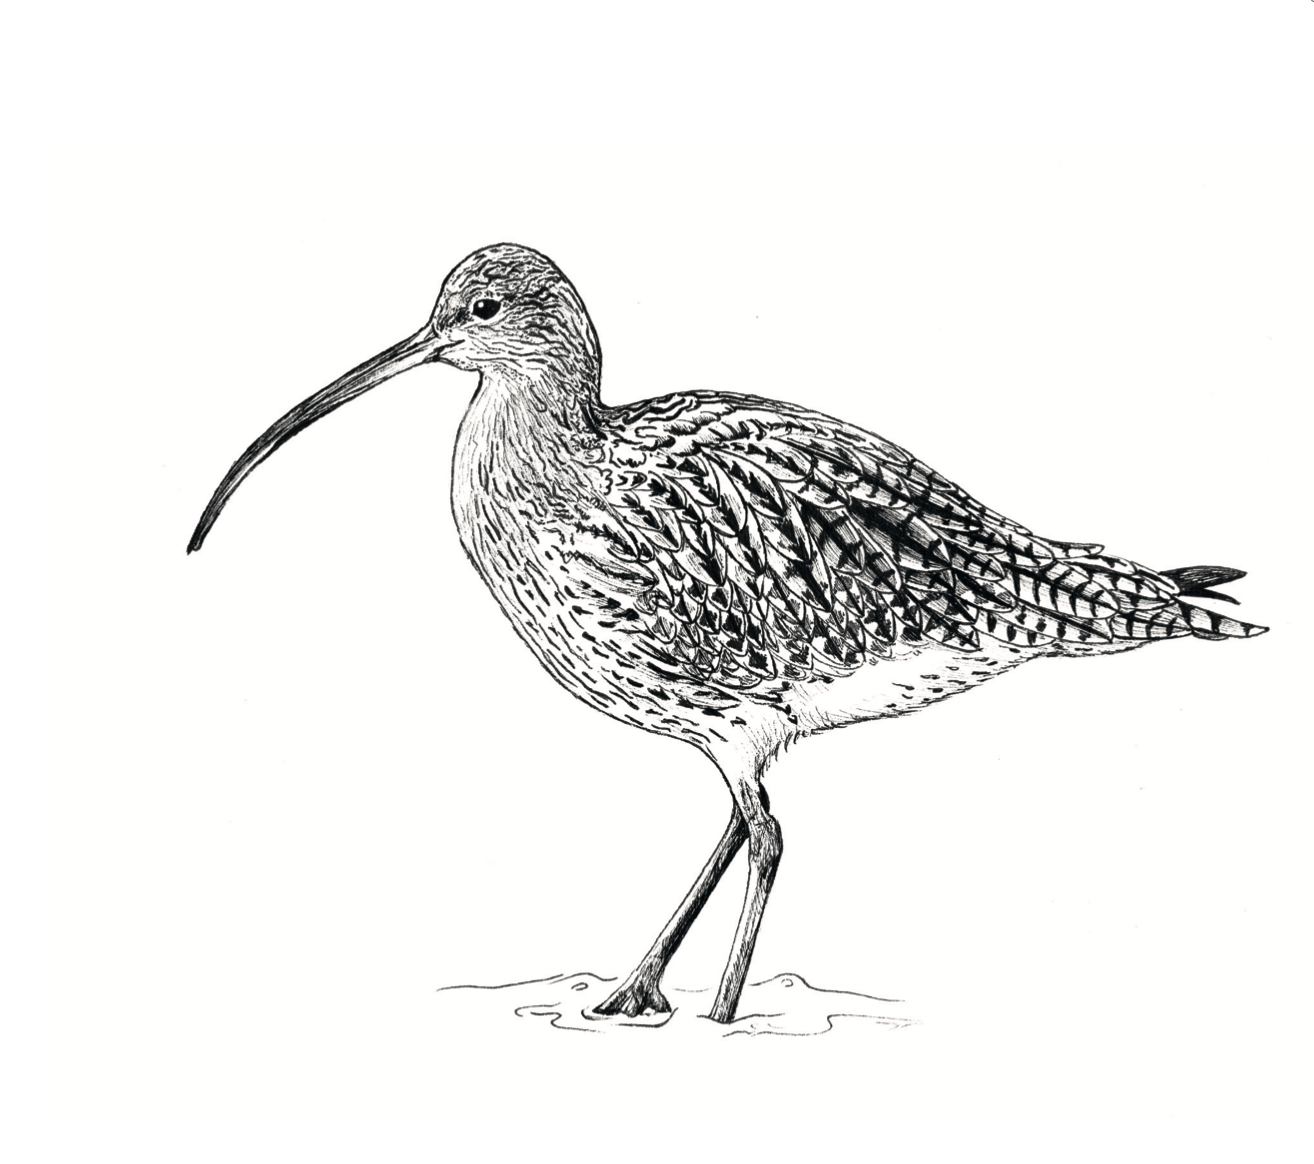 The Curlew